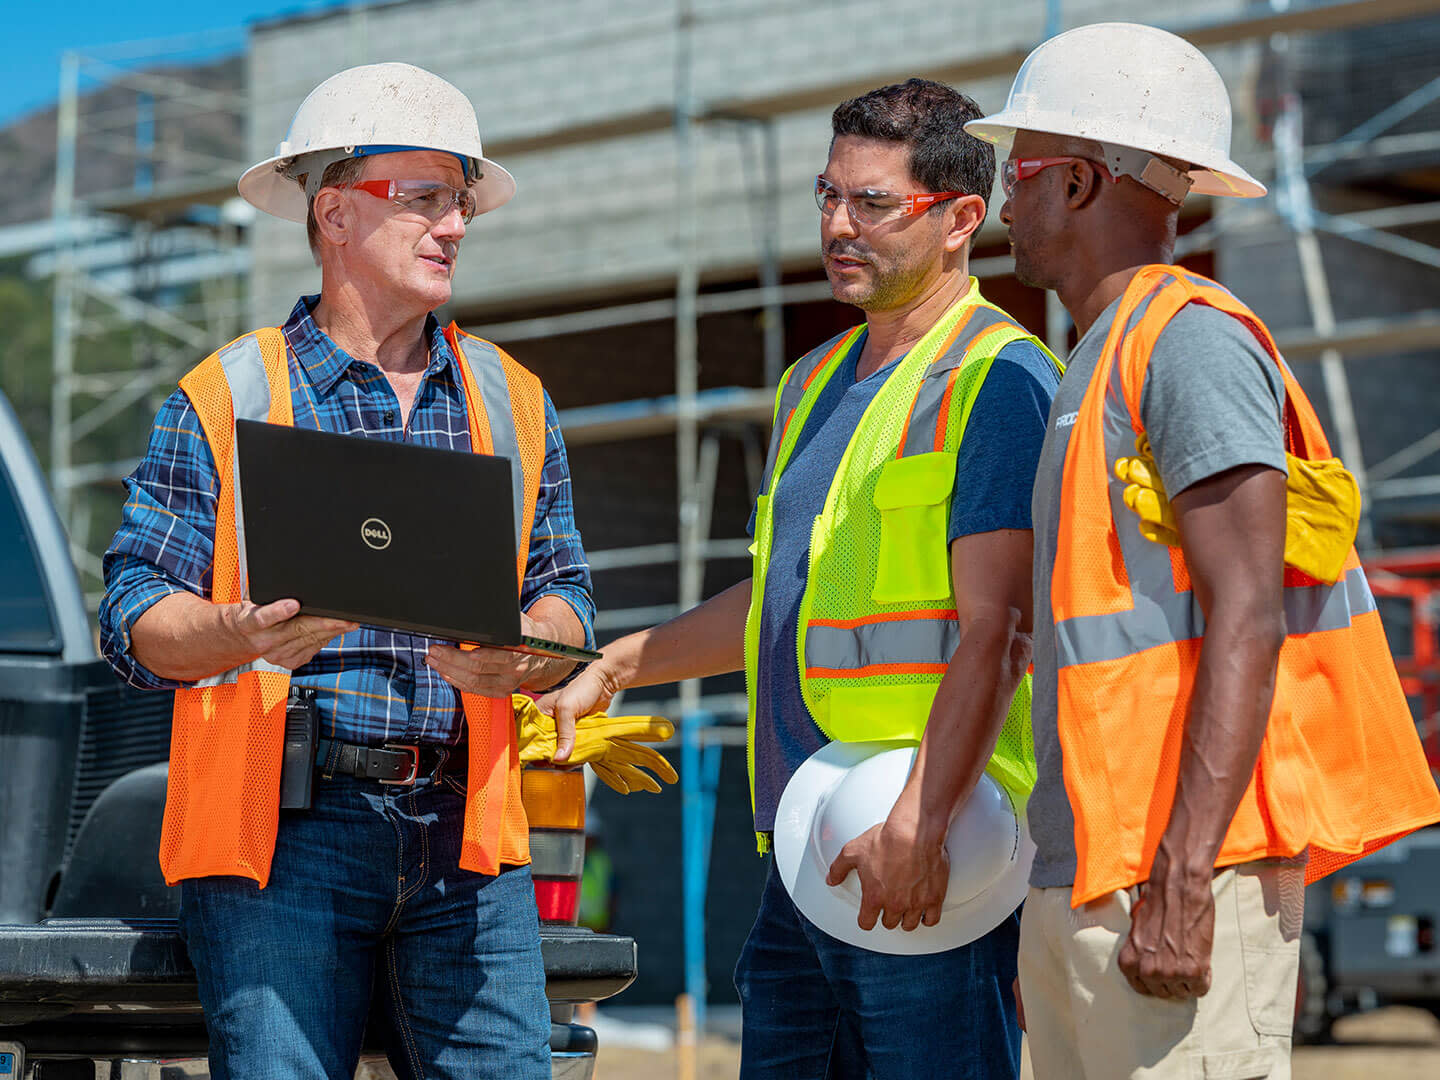 Workers discussing building plans on a jobsite.